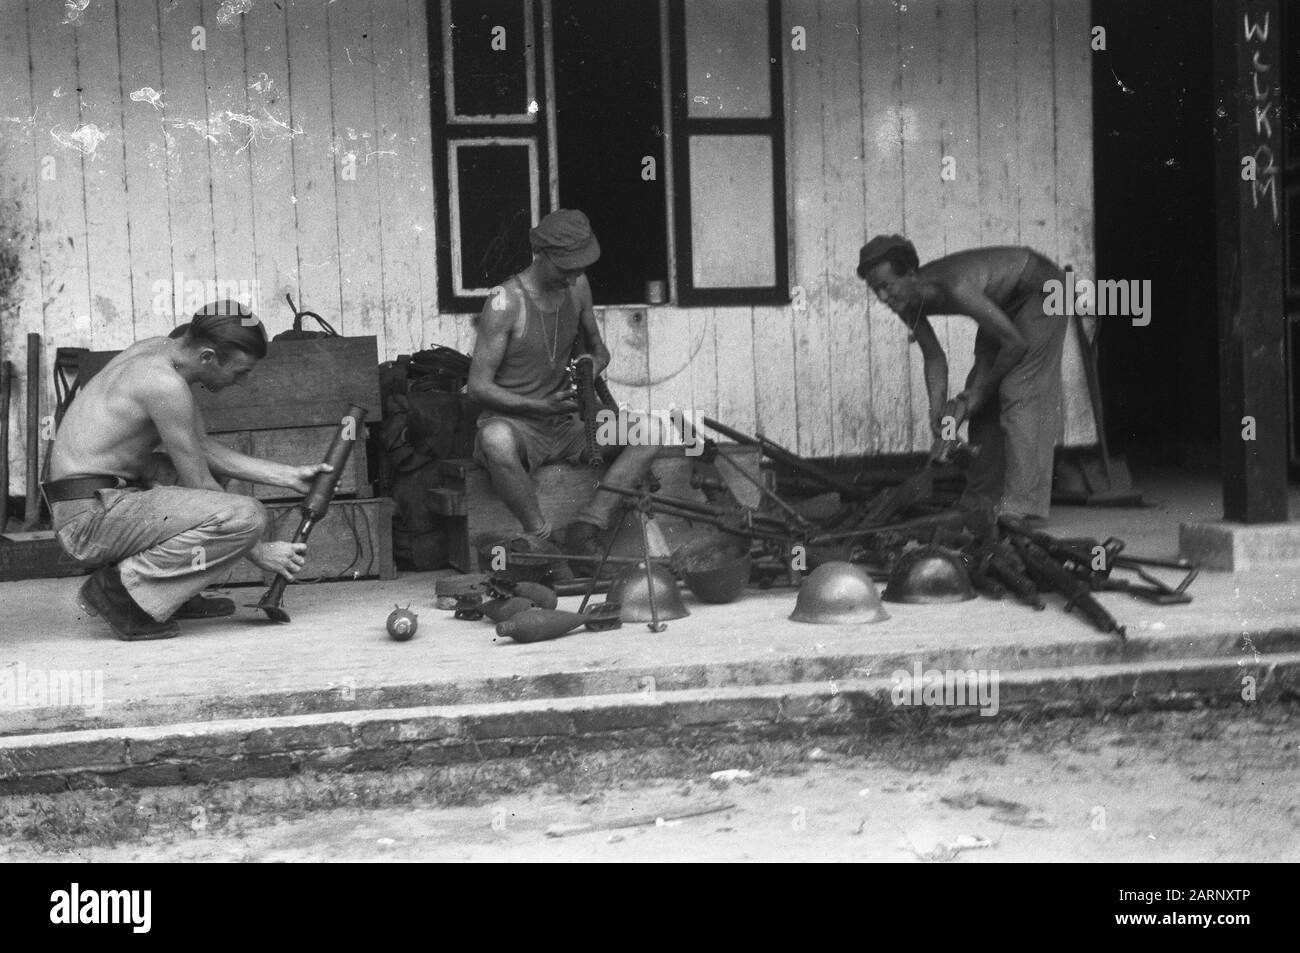 Photos liberation North Sumatra  In Aek Loba, behind the Asahan river, the Dutch soldiers set up a warehouse of confiscated weapons. The soldiers Gerard van de Beek from Schaesberg in Limburg, Piet Witte from Sluiskil and Rien Wezenbeek from Kruisland sort out the stock. Date: 19 December 1948 Location: Indonesia, Dutch East Indies, Sumatra Stock Photo